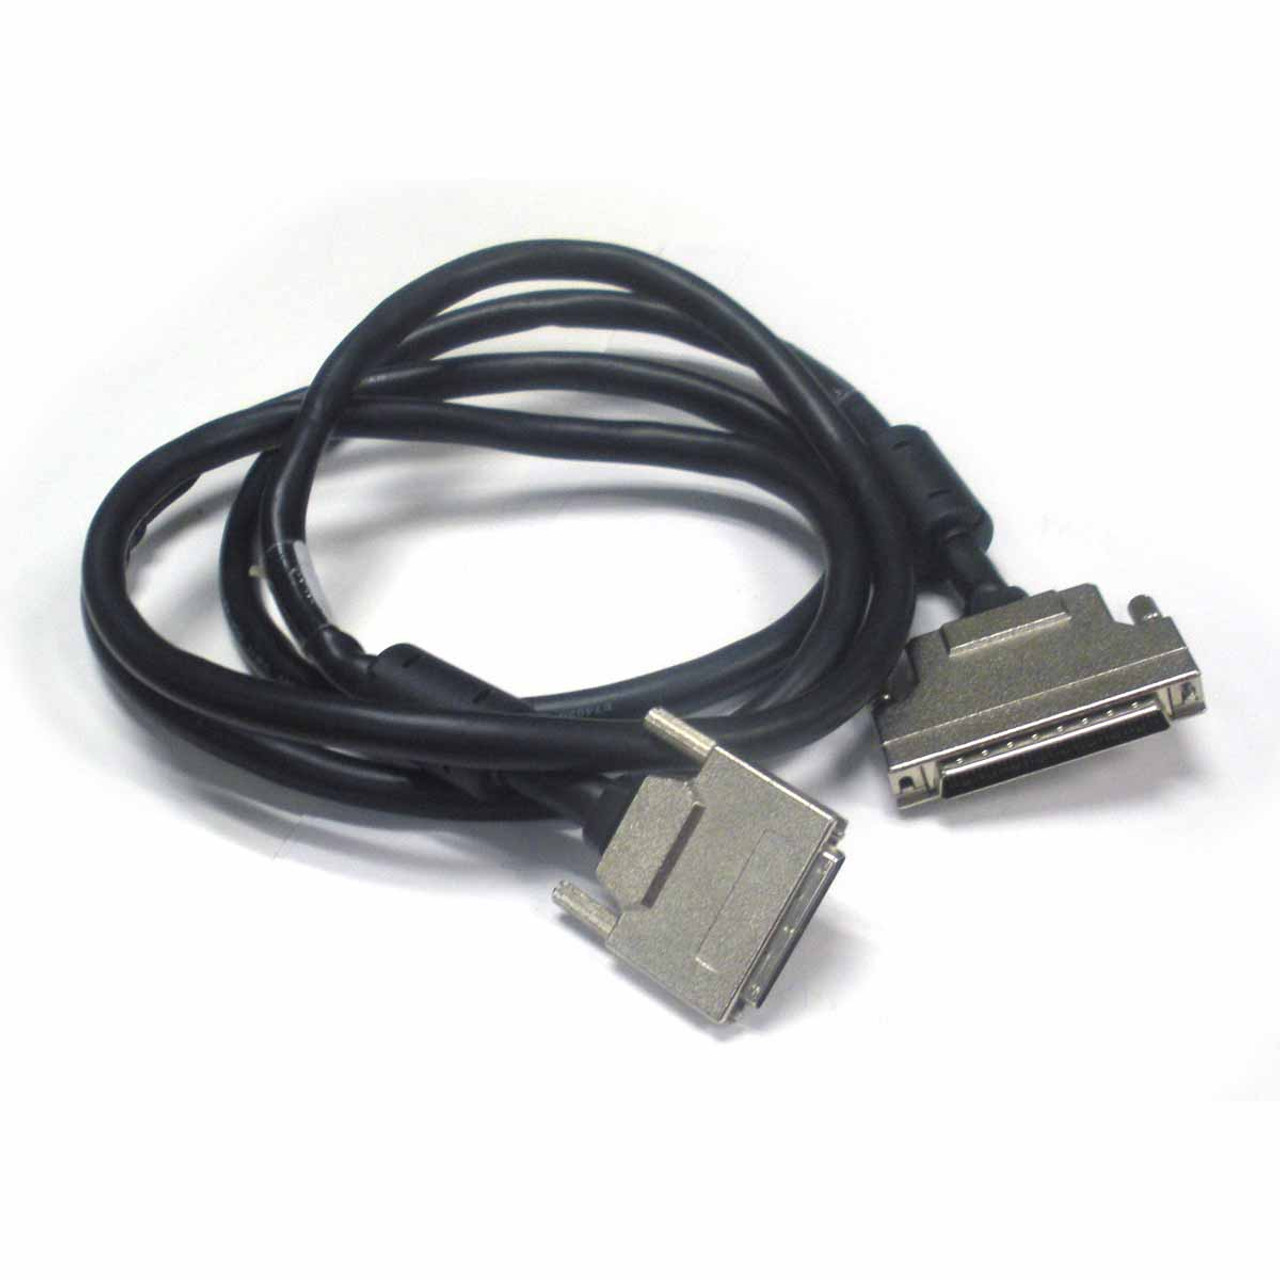 Sun 530-3625 External SCSI Cable HD68 to VHDCI 2M